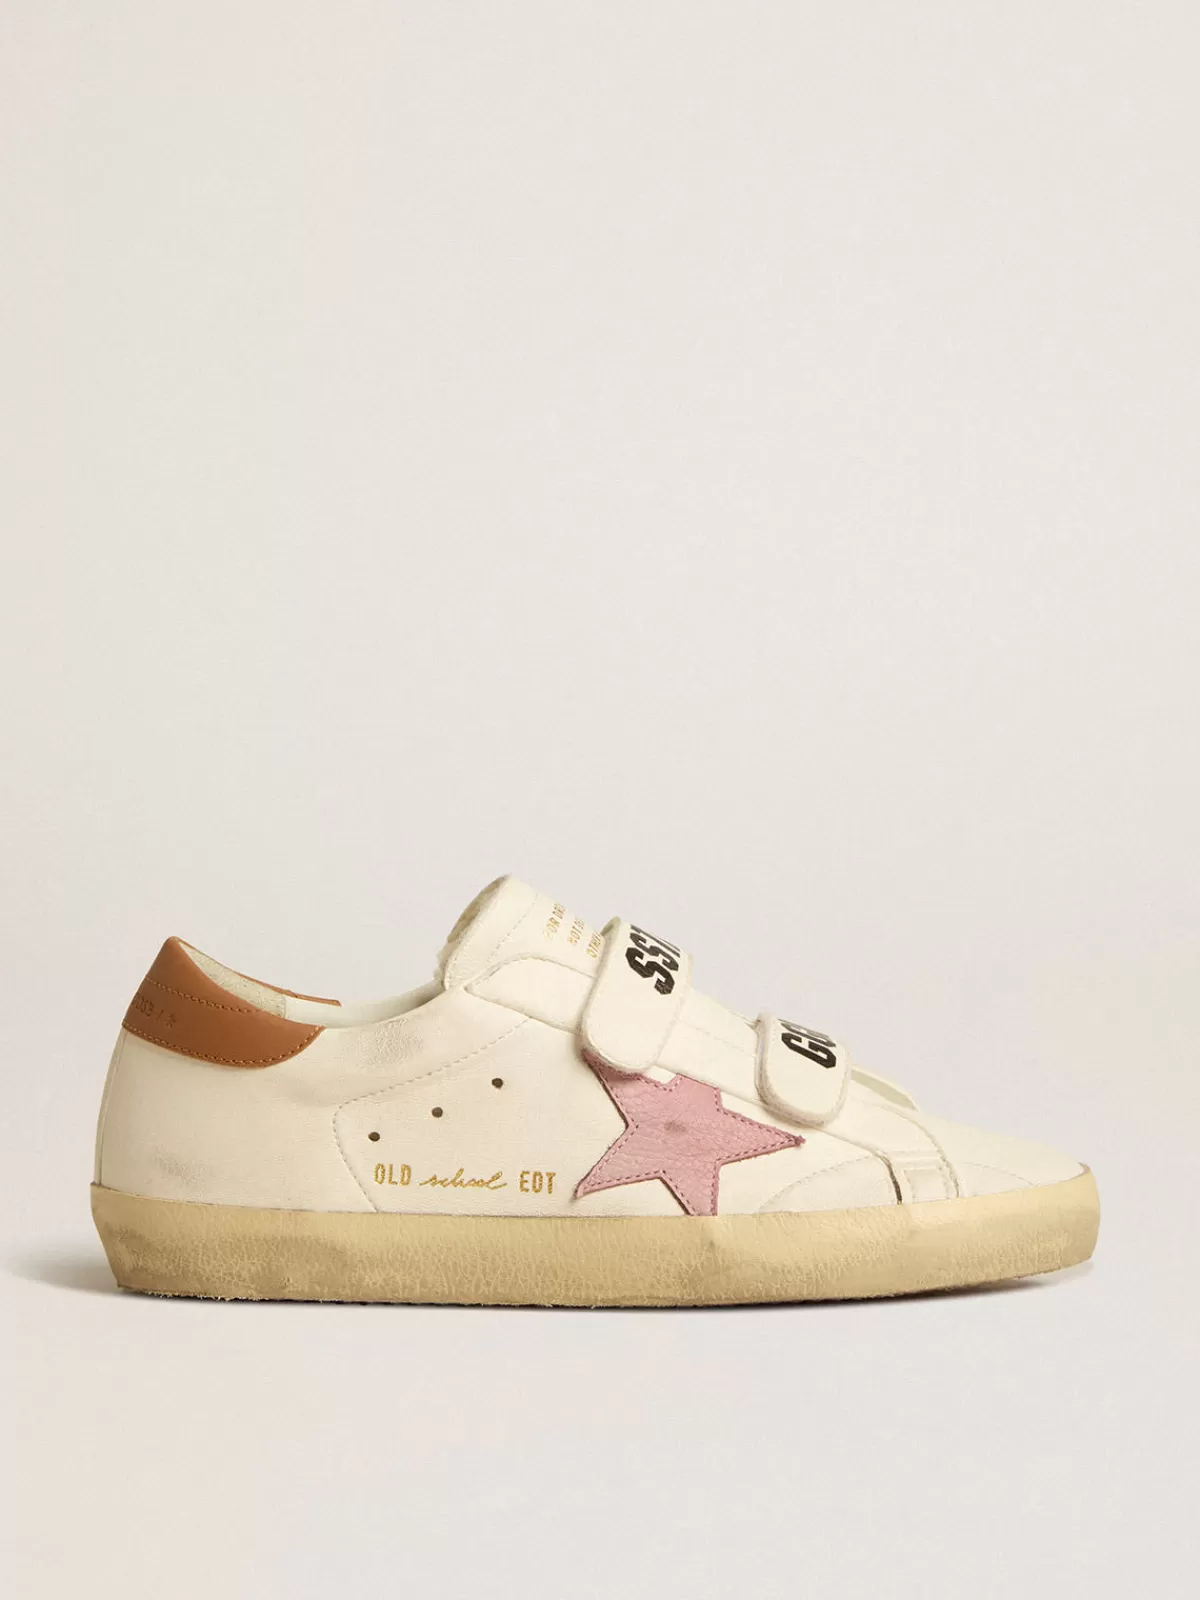 Golden Goose Old School in nappa leather with pink leather star and beige shearling lining Discount